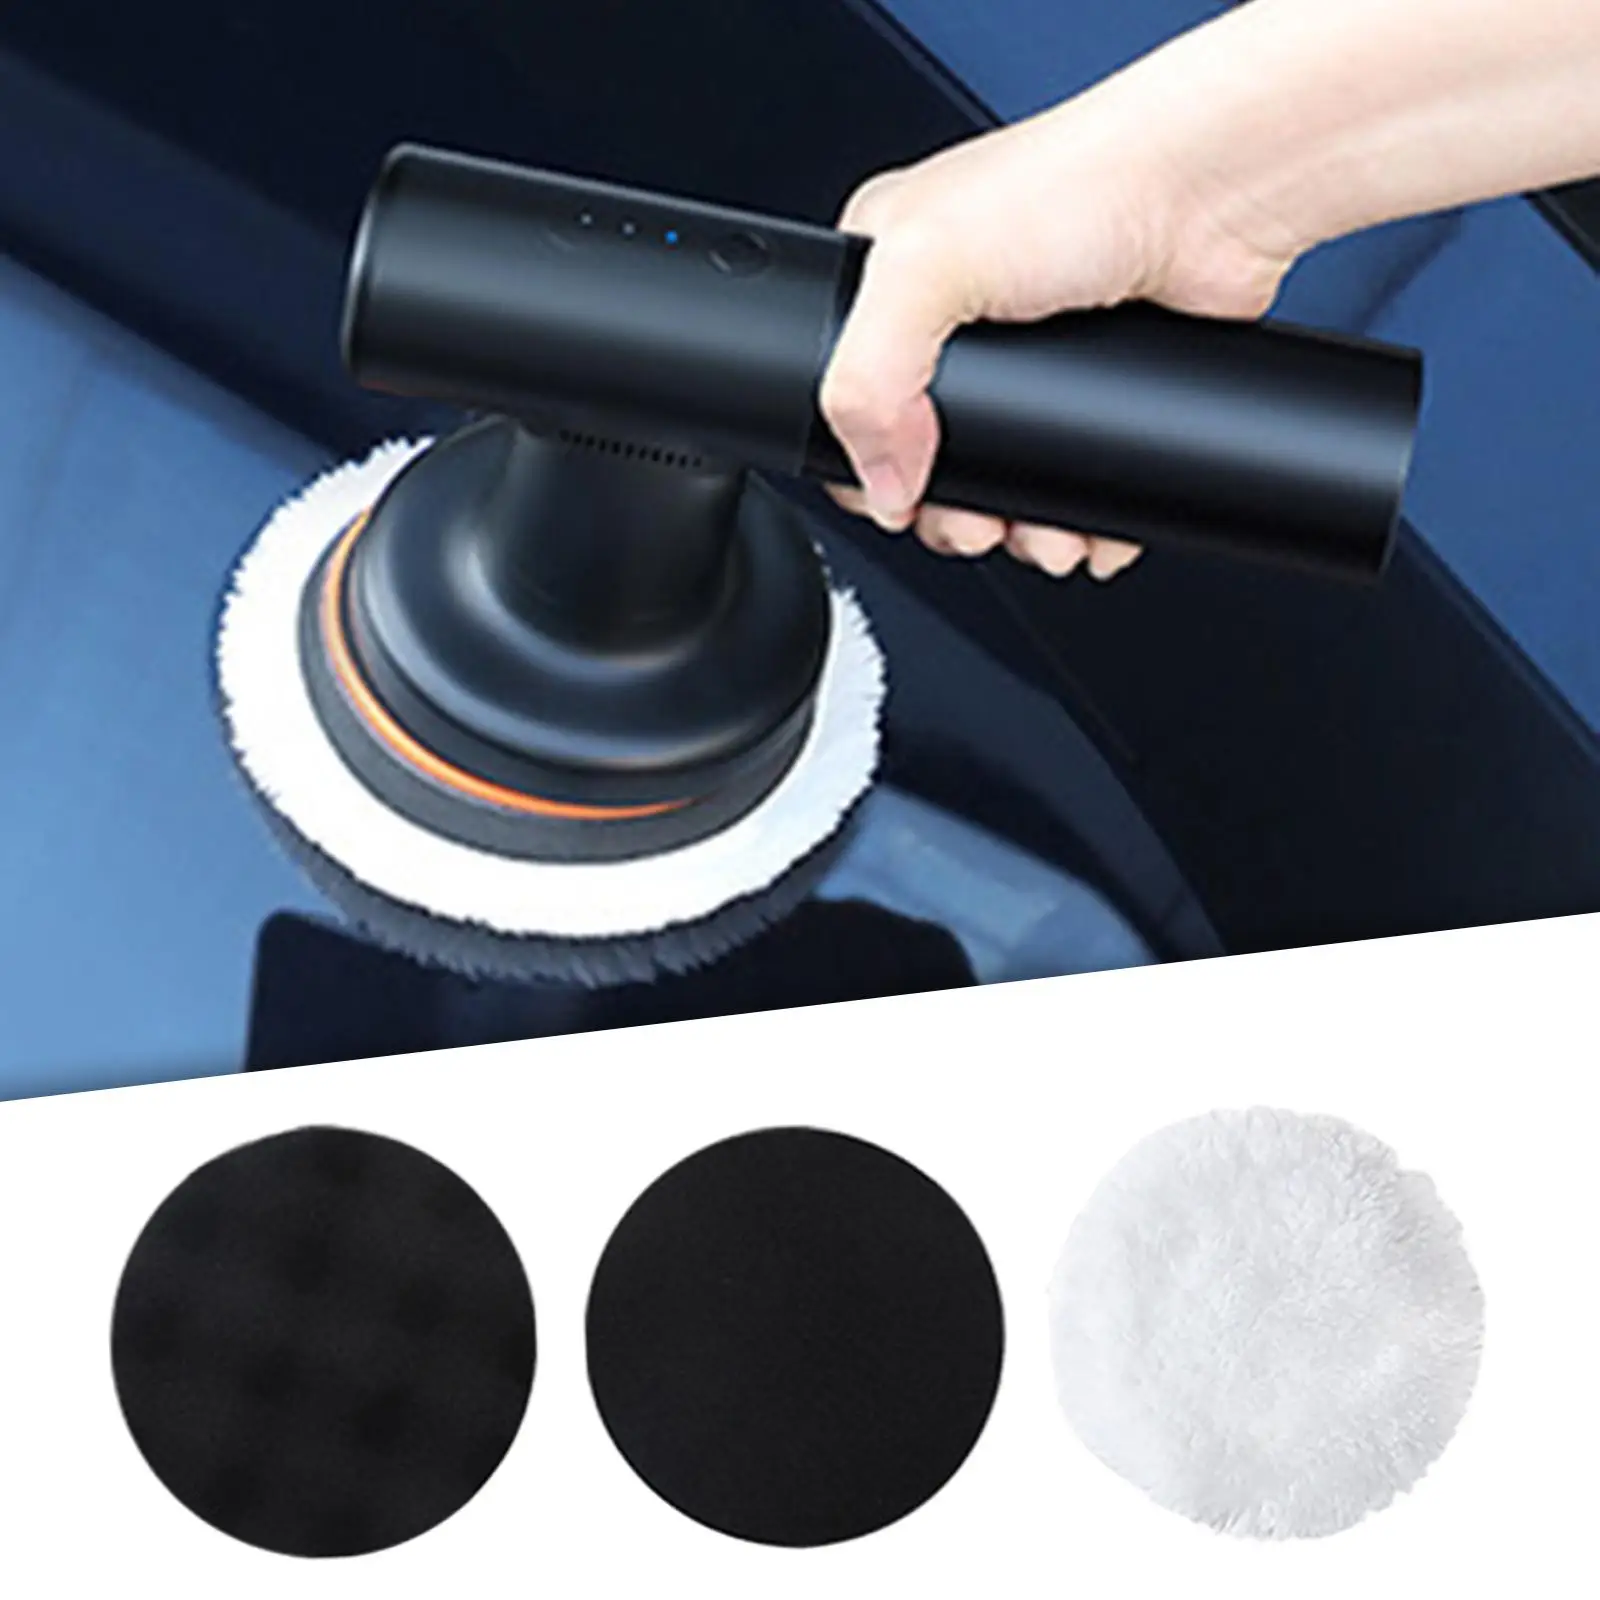 Polishing Pads Kit 3Pcs Waxing Evenly Clean Polish Professional Polisher for Car